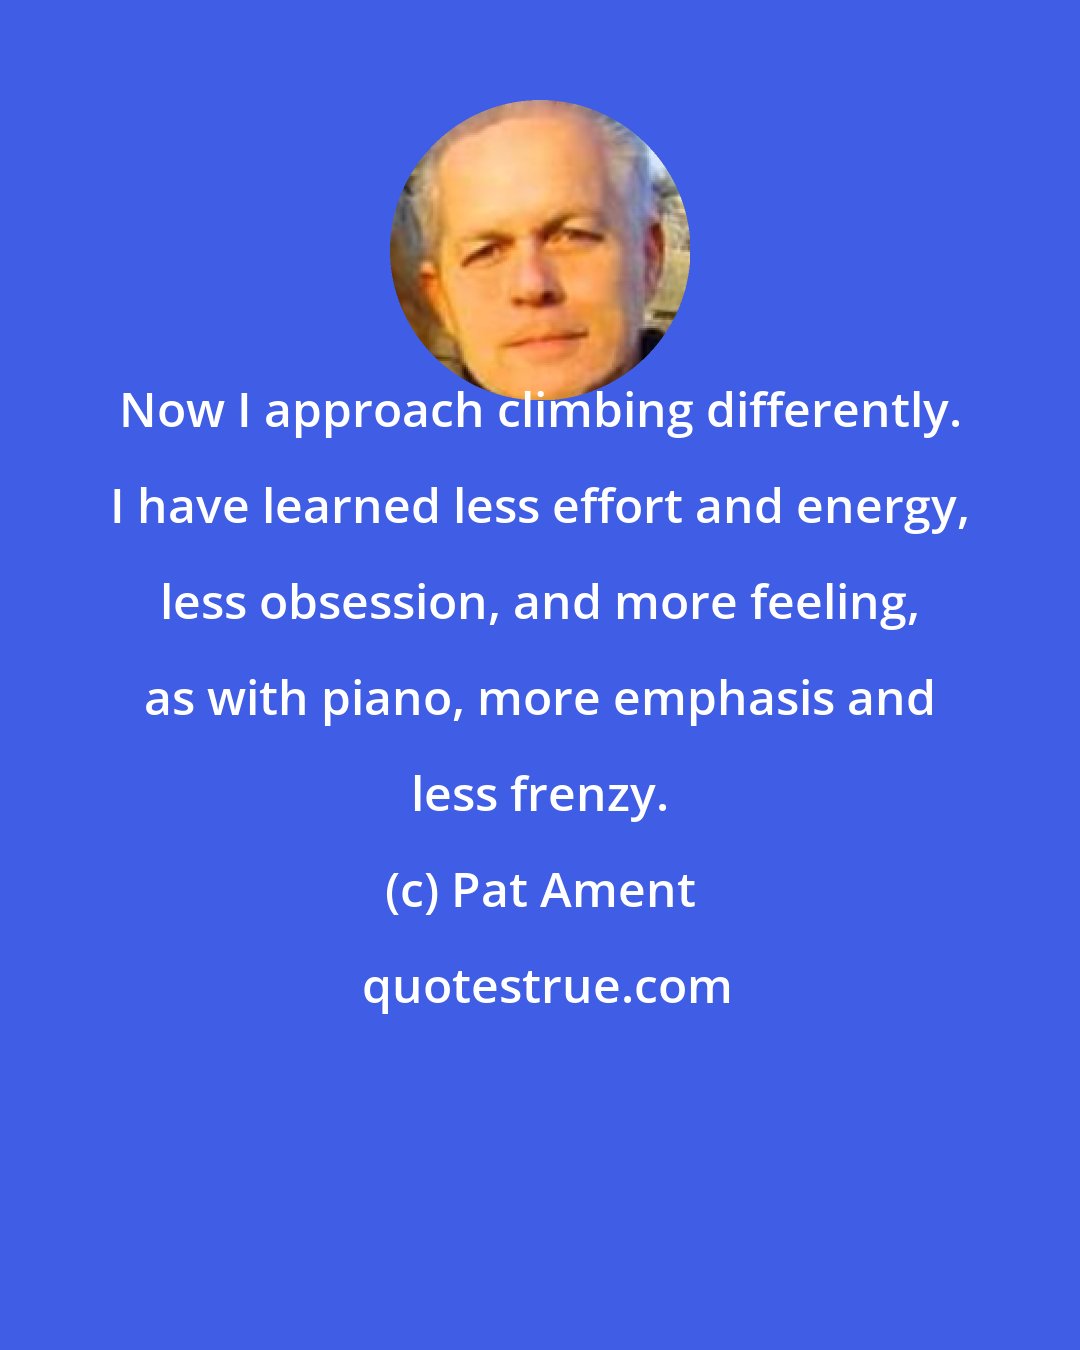 Pat Ament: Now I approach climbing differently. I have learned less effort and energy, less obsession, and more feeling, as with piano, more emphasis and less frenzy.